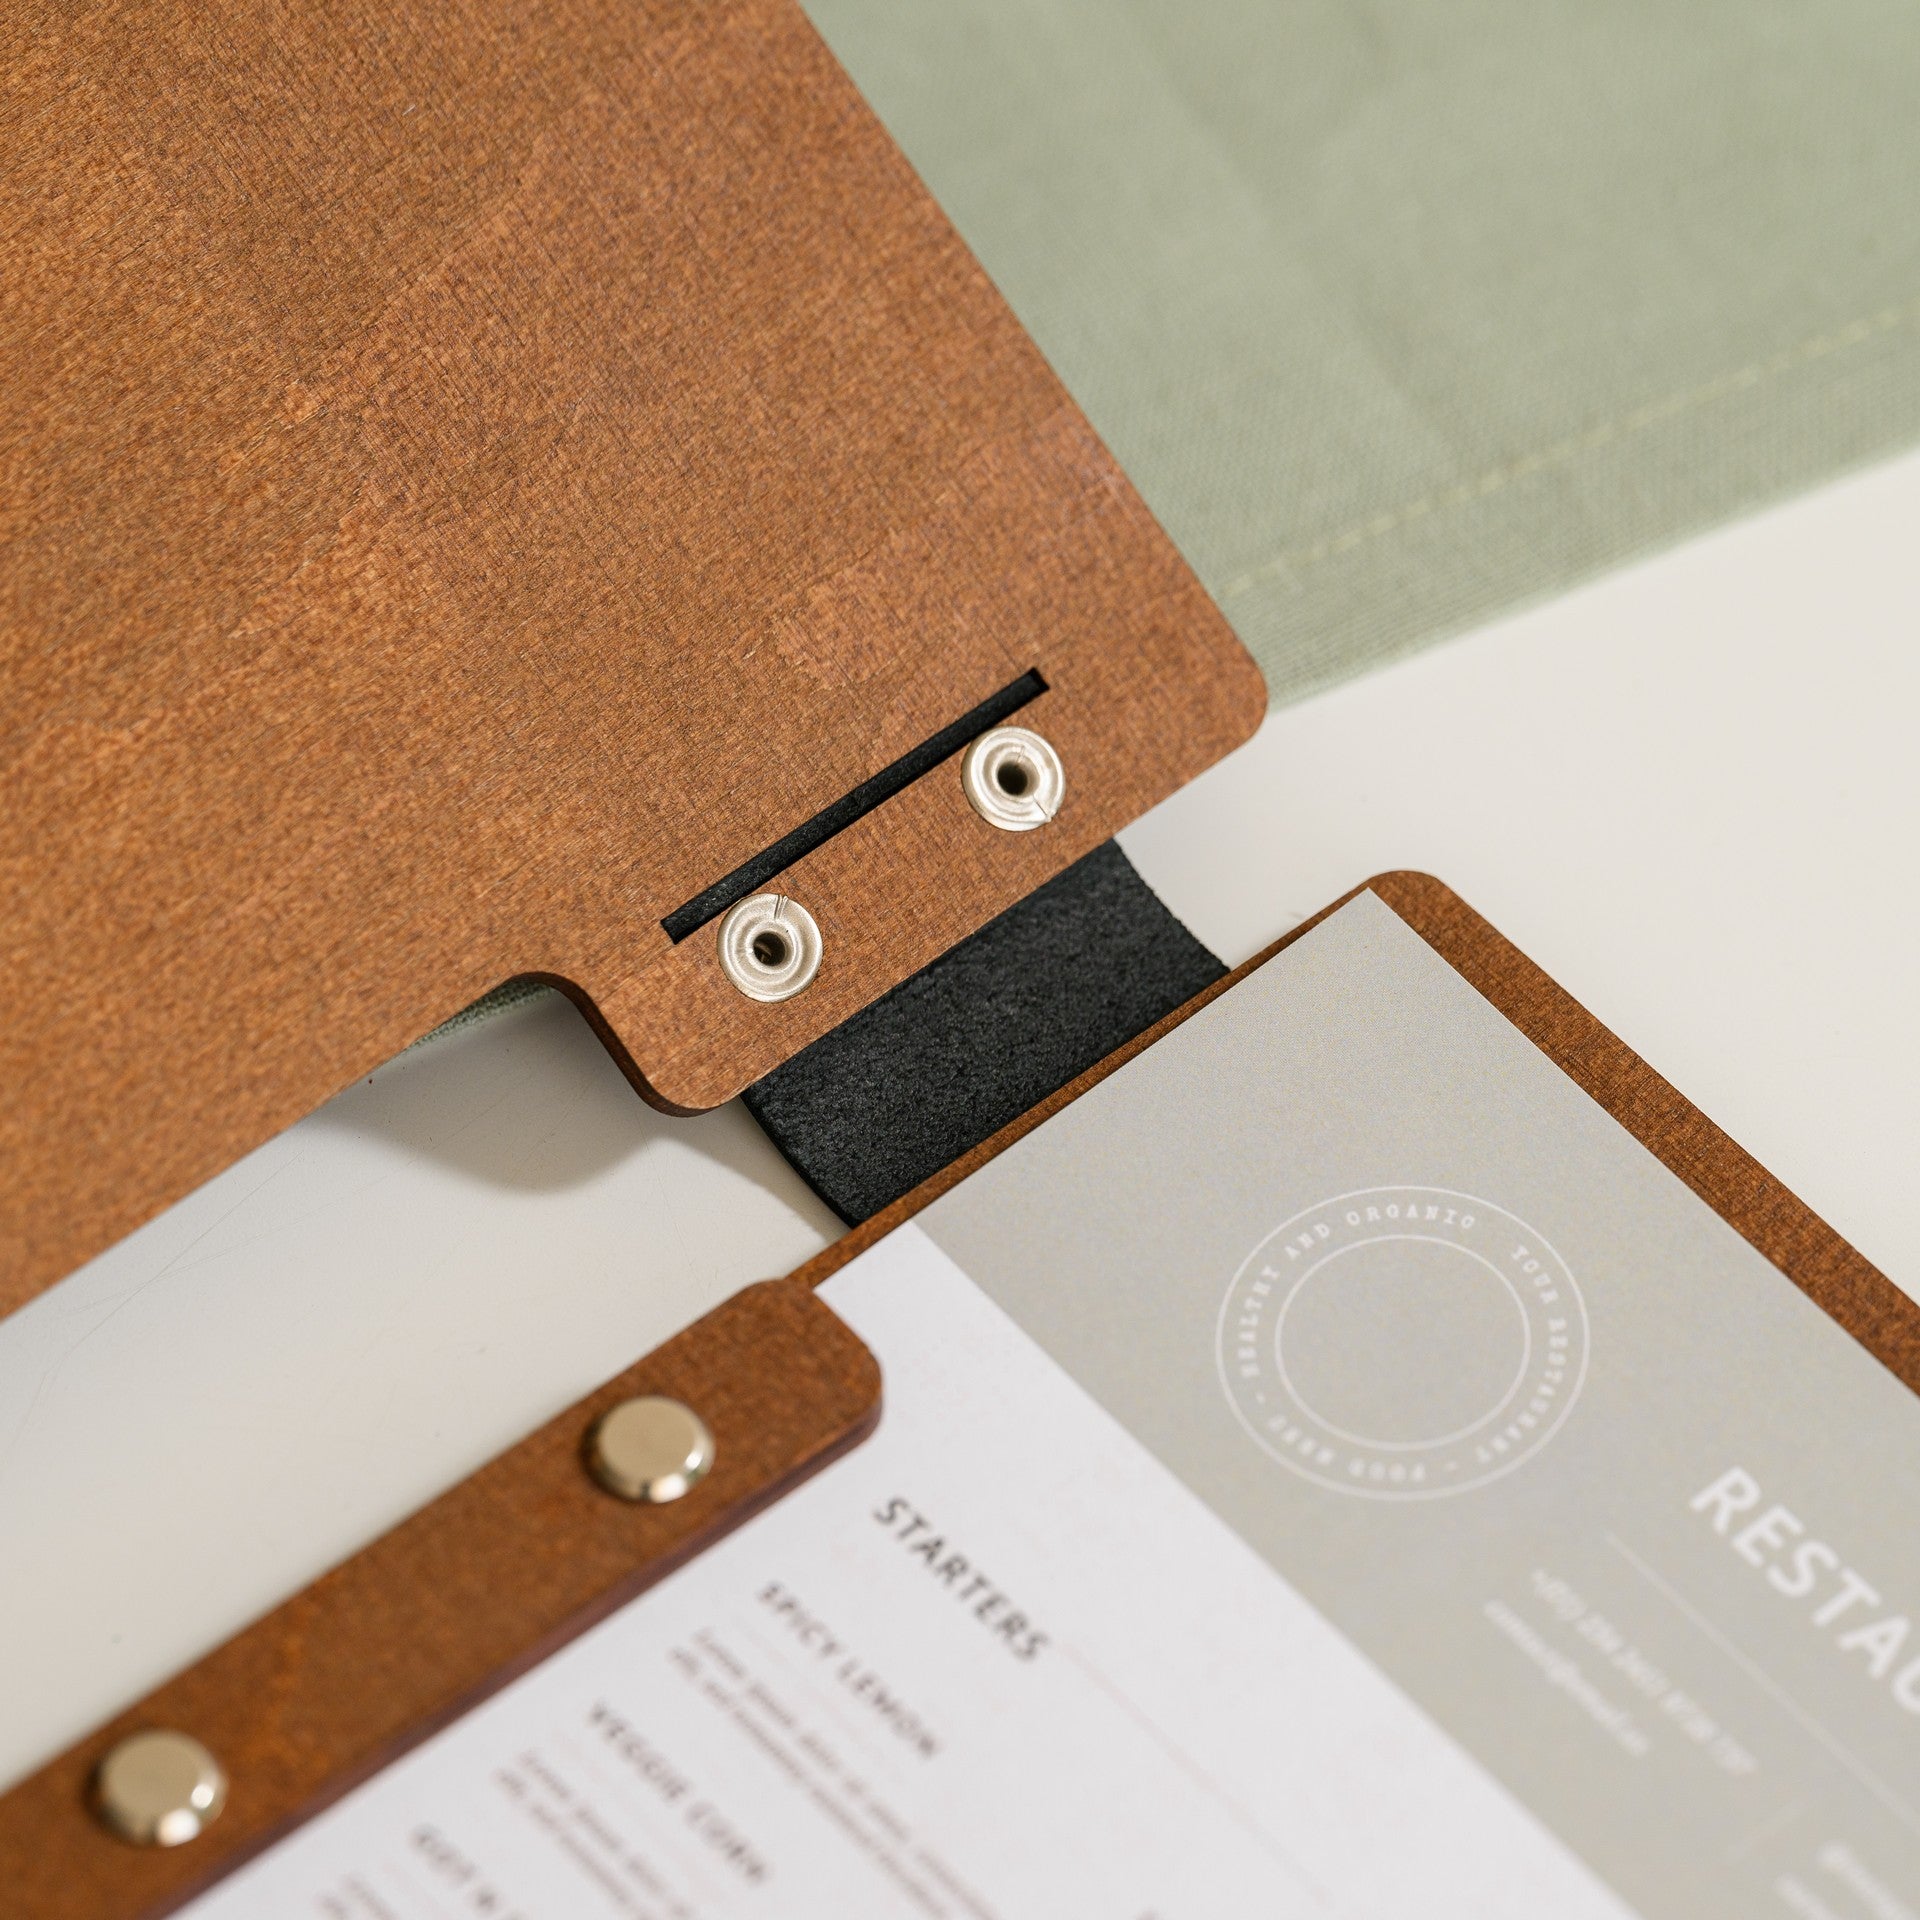 Artisanal Wooden Menu Holder: Add character to your presentation with handcrafted detailing.